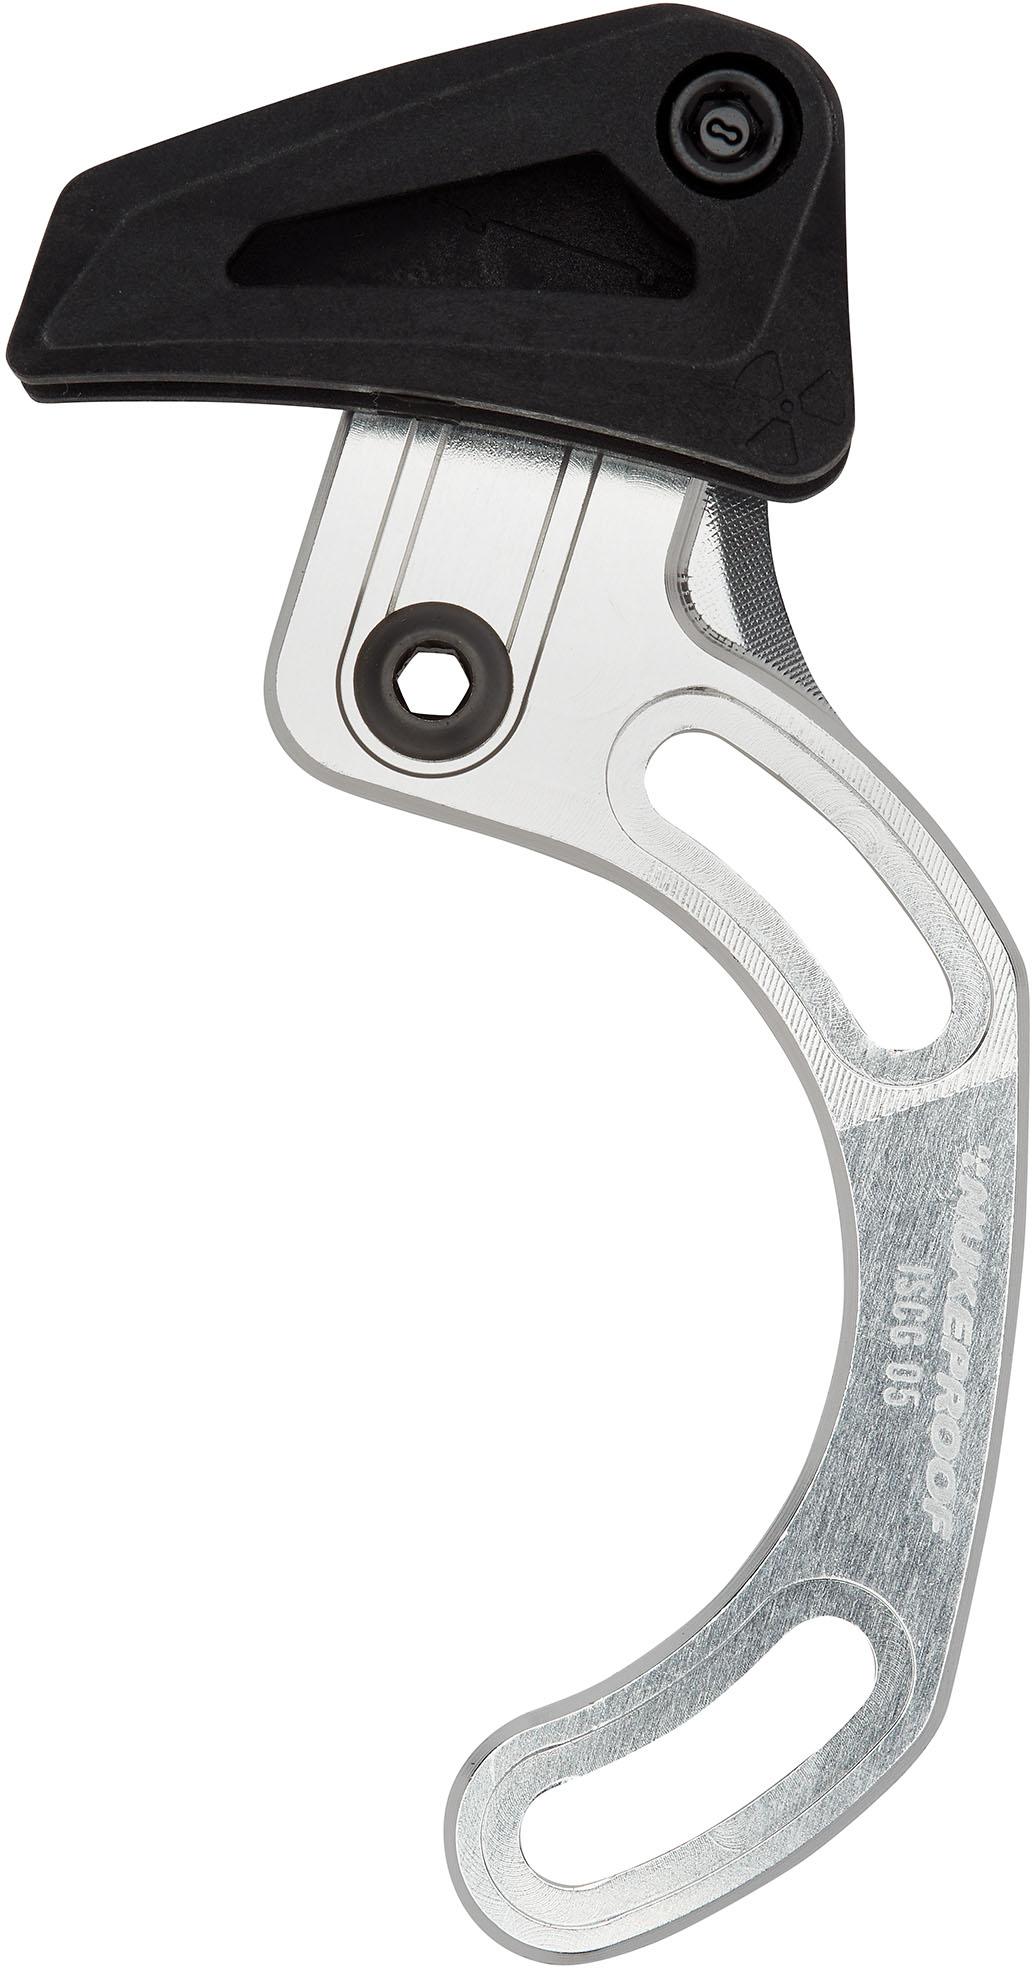 Nukeproof Chain Guide Iscg 05 Top Guide - Silver